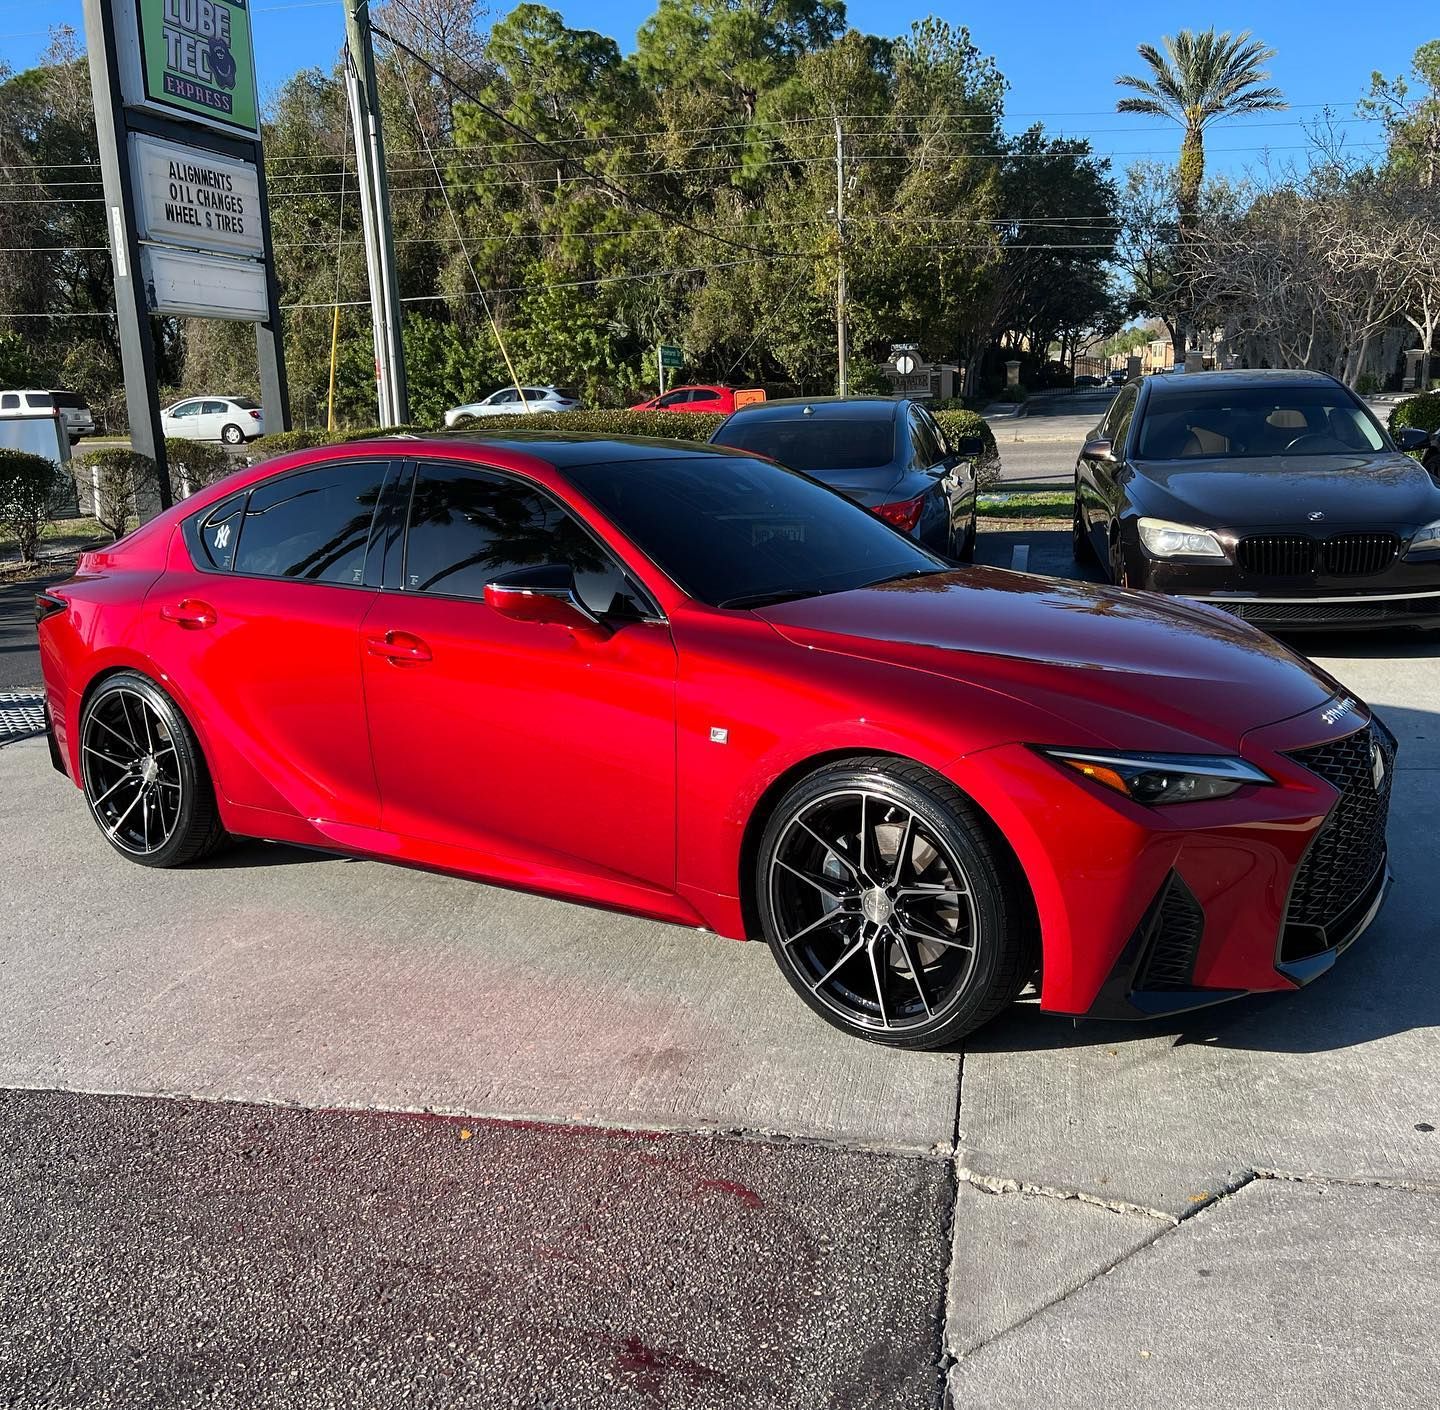 Lexus IS XE40 with 19×8.5 and 19×9.5-inch Vertini RFS1.8